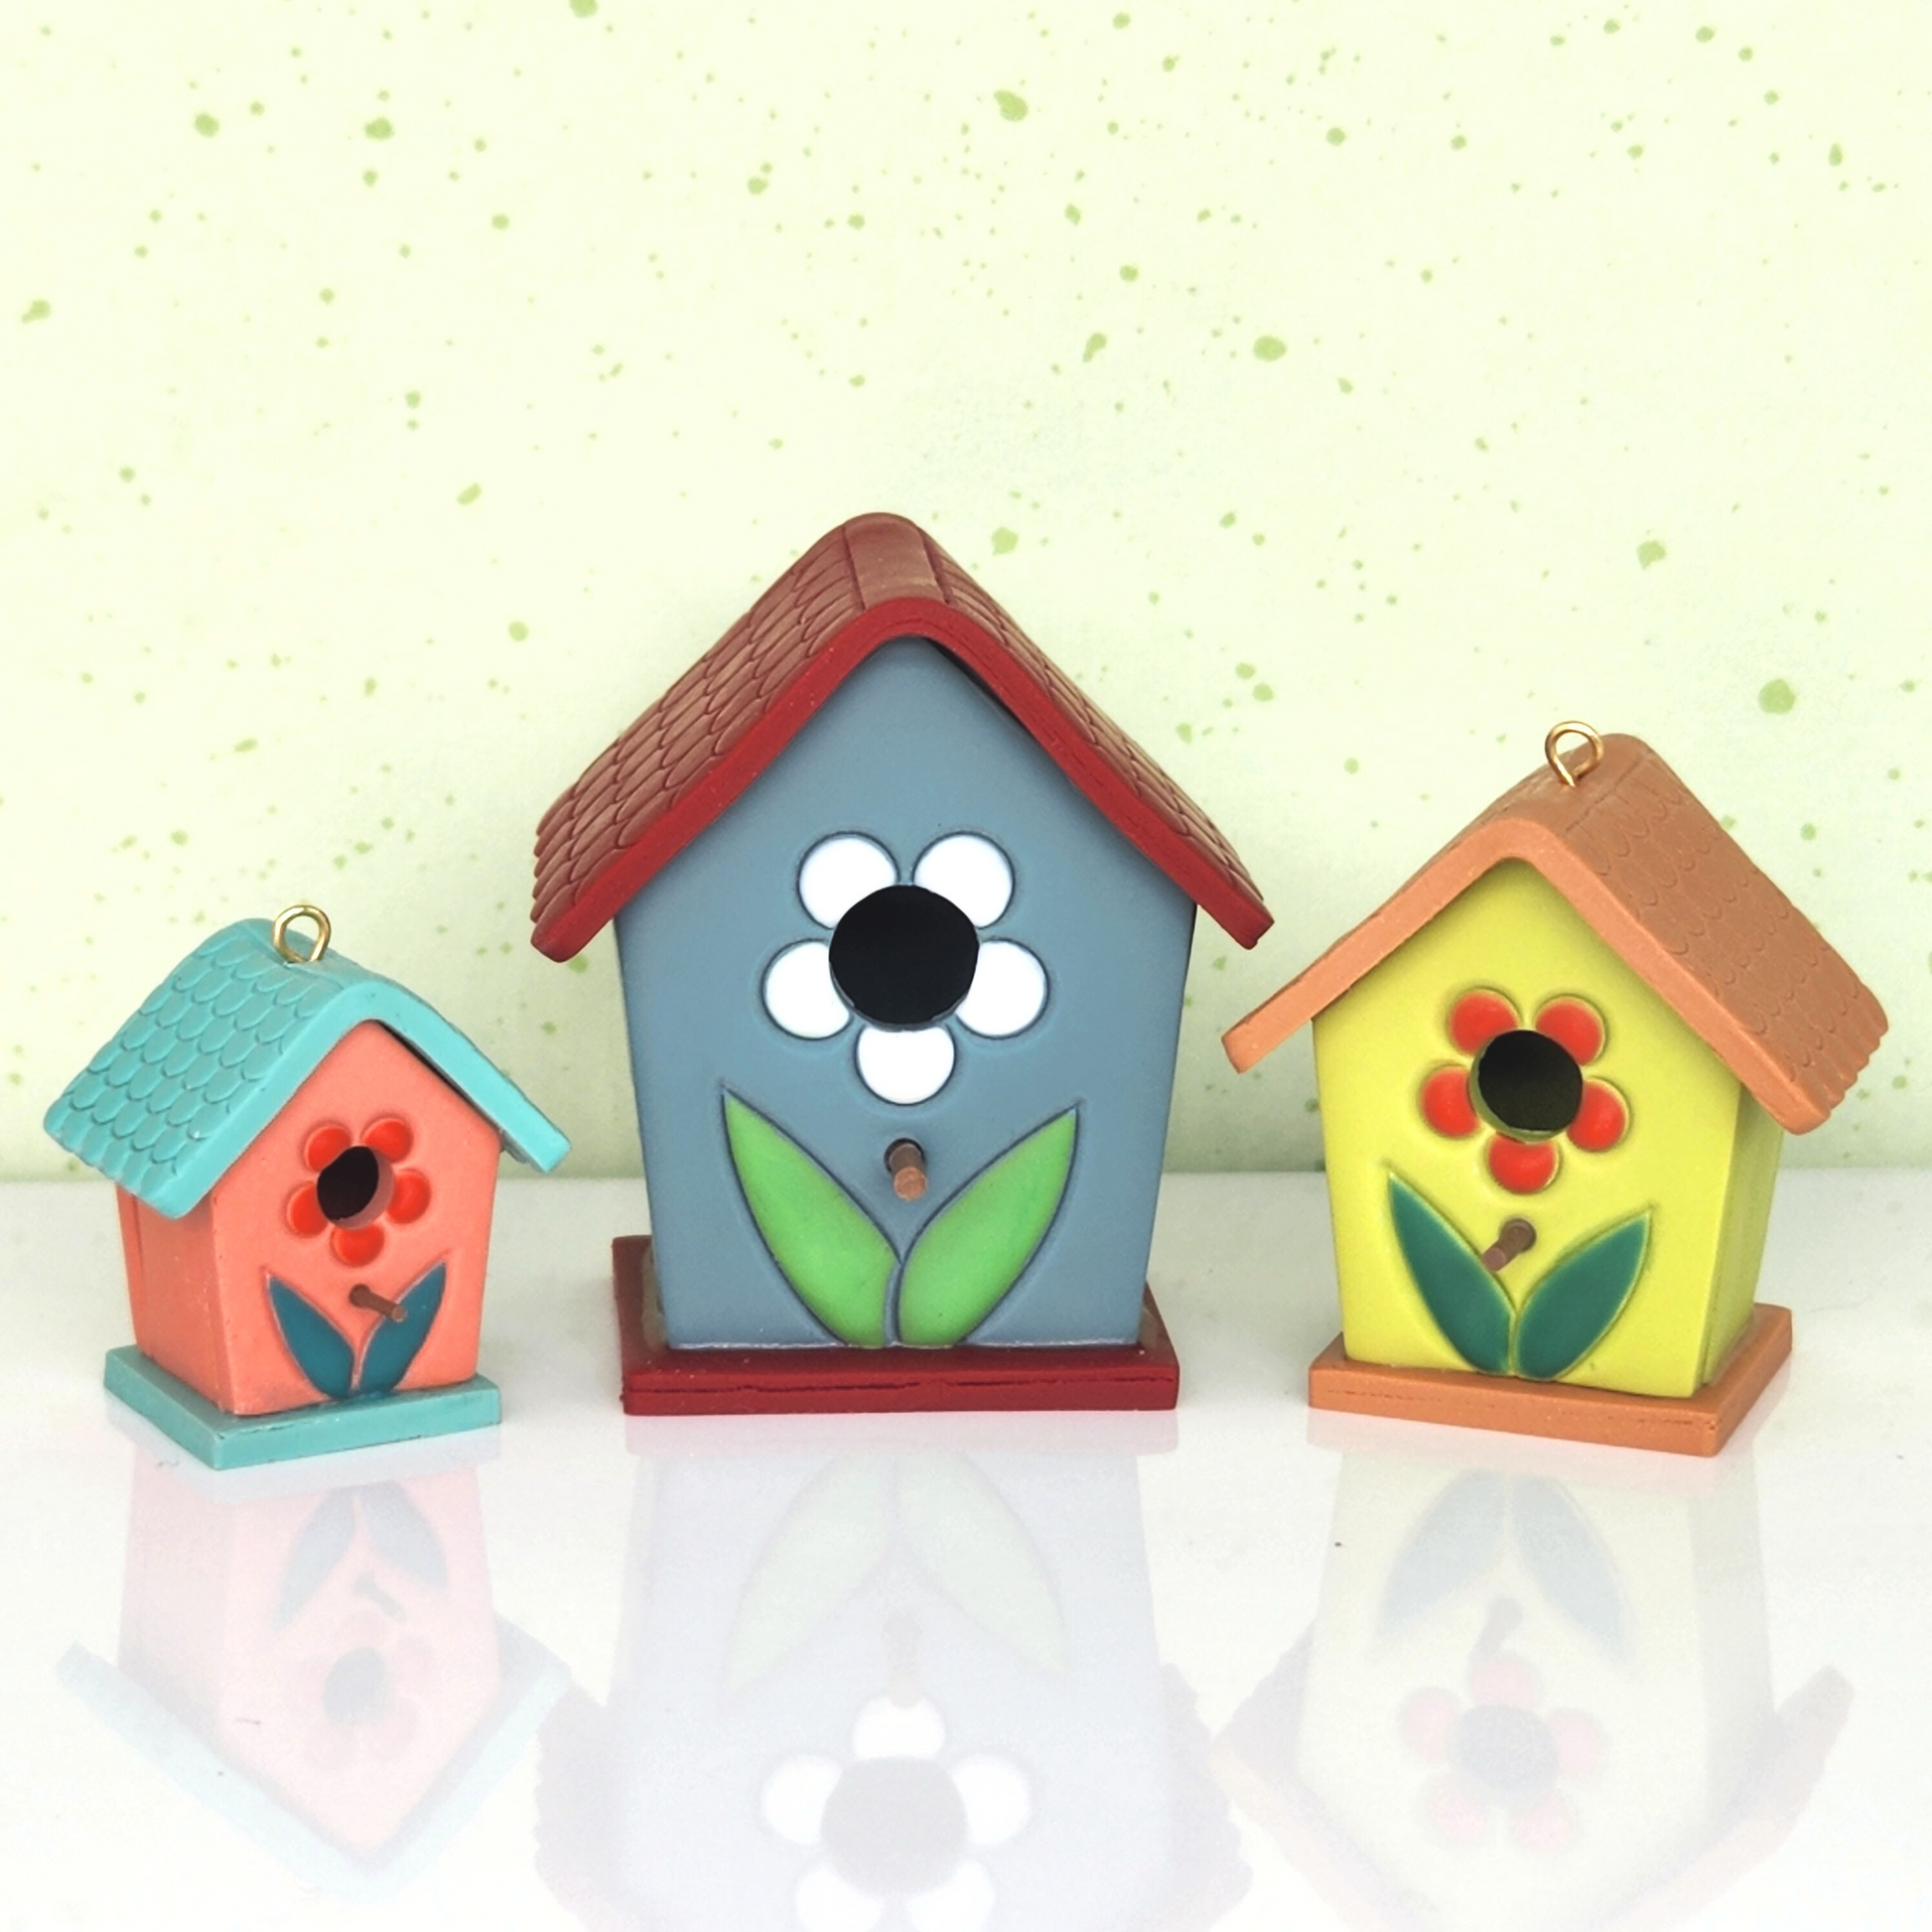 Sample finish product of 3D Birdhouse kit on polymer clay, shows comparison of three sizes available